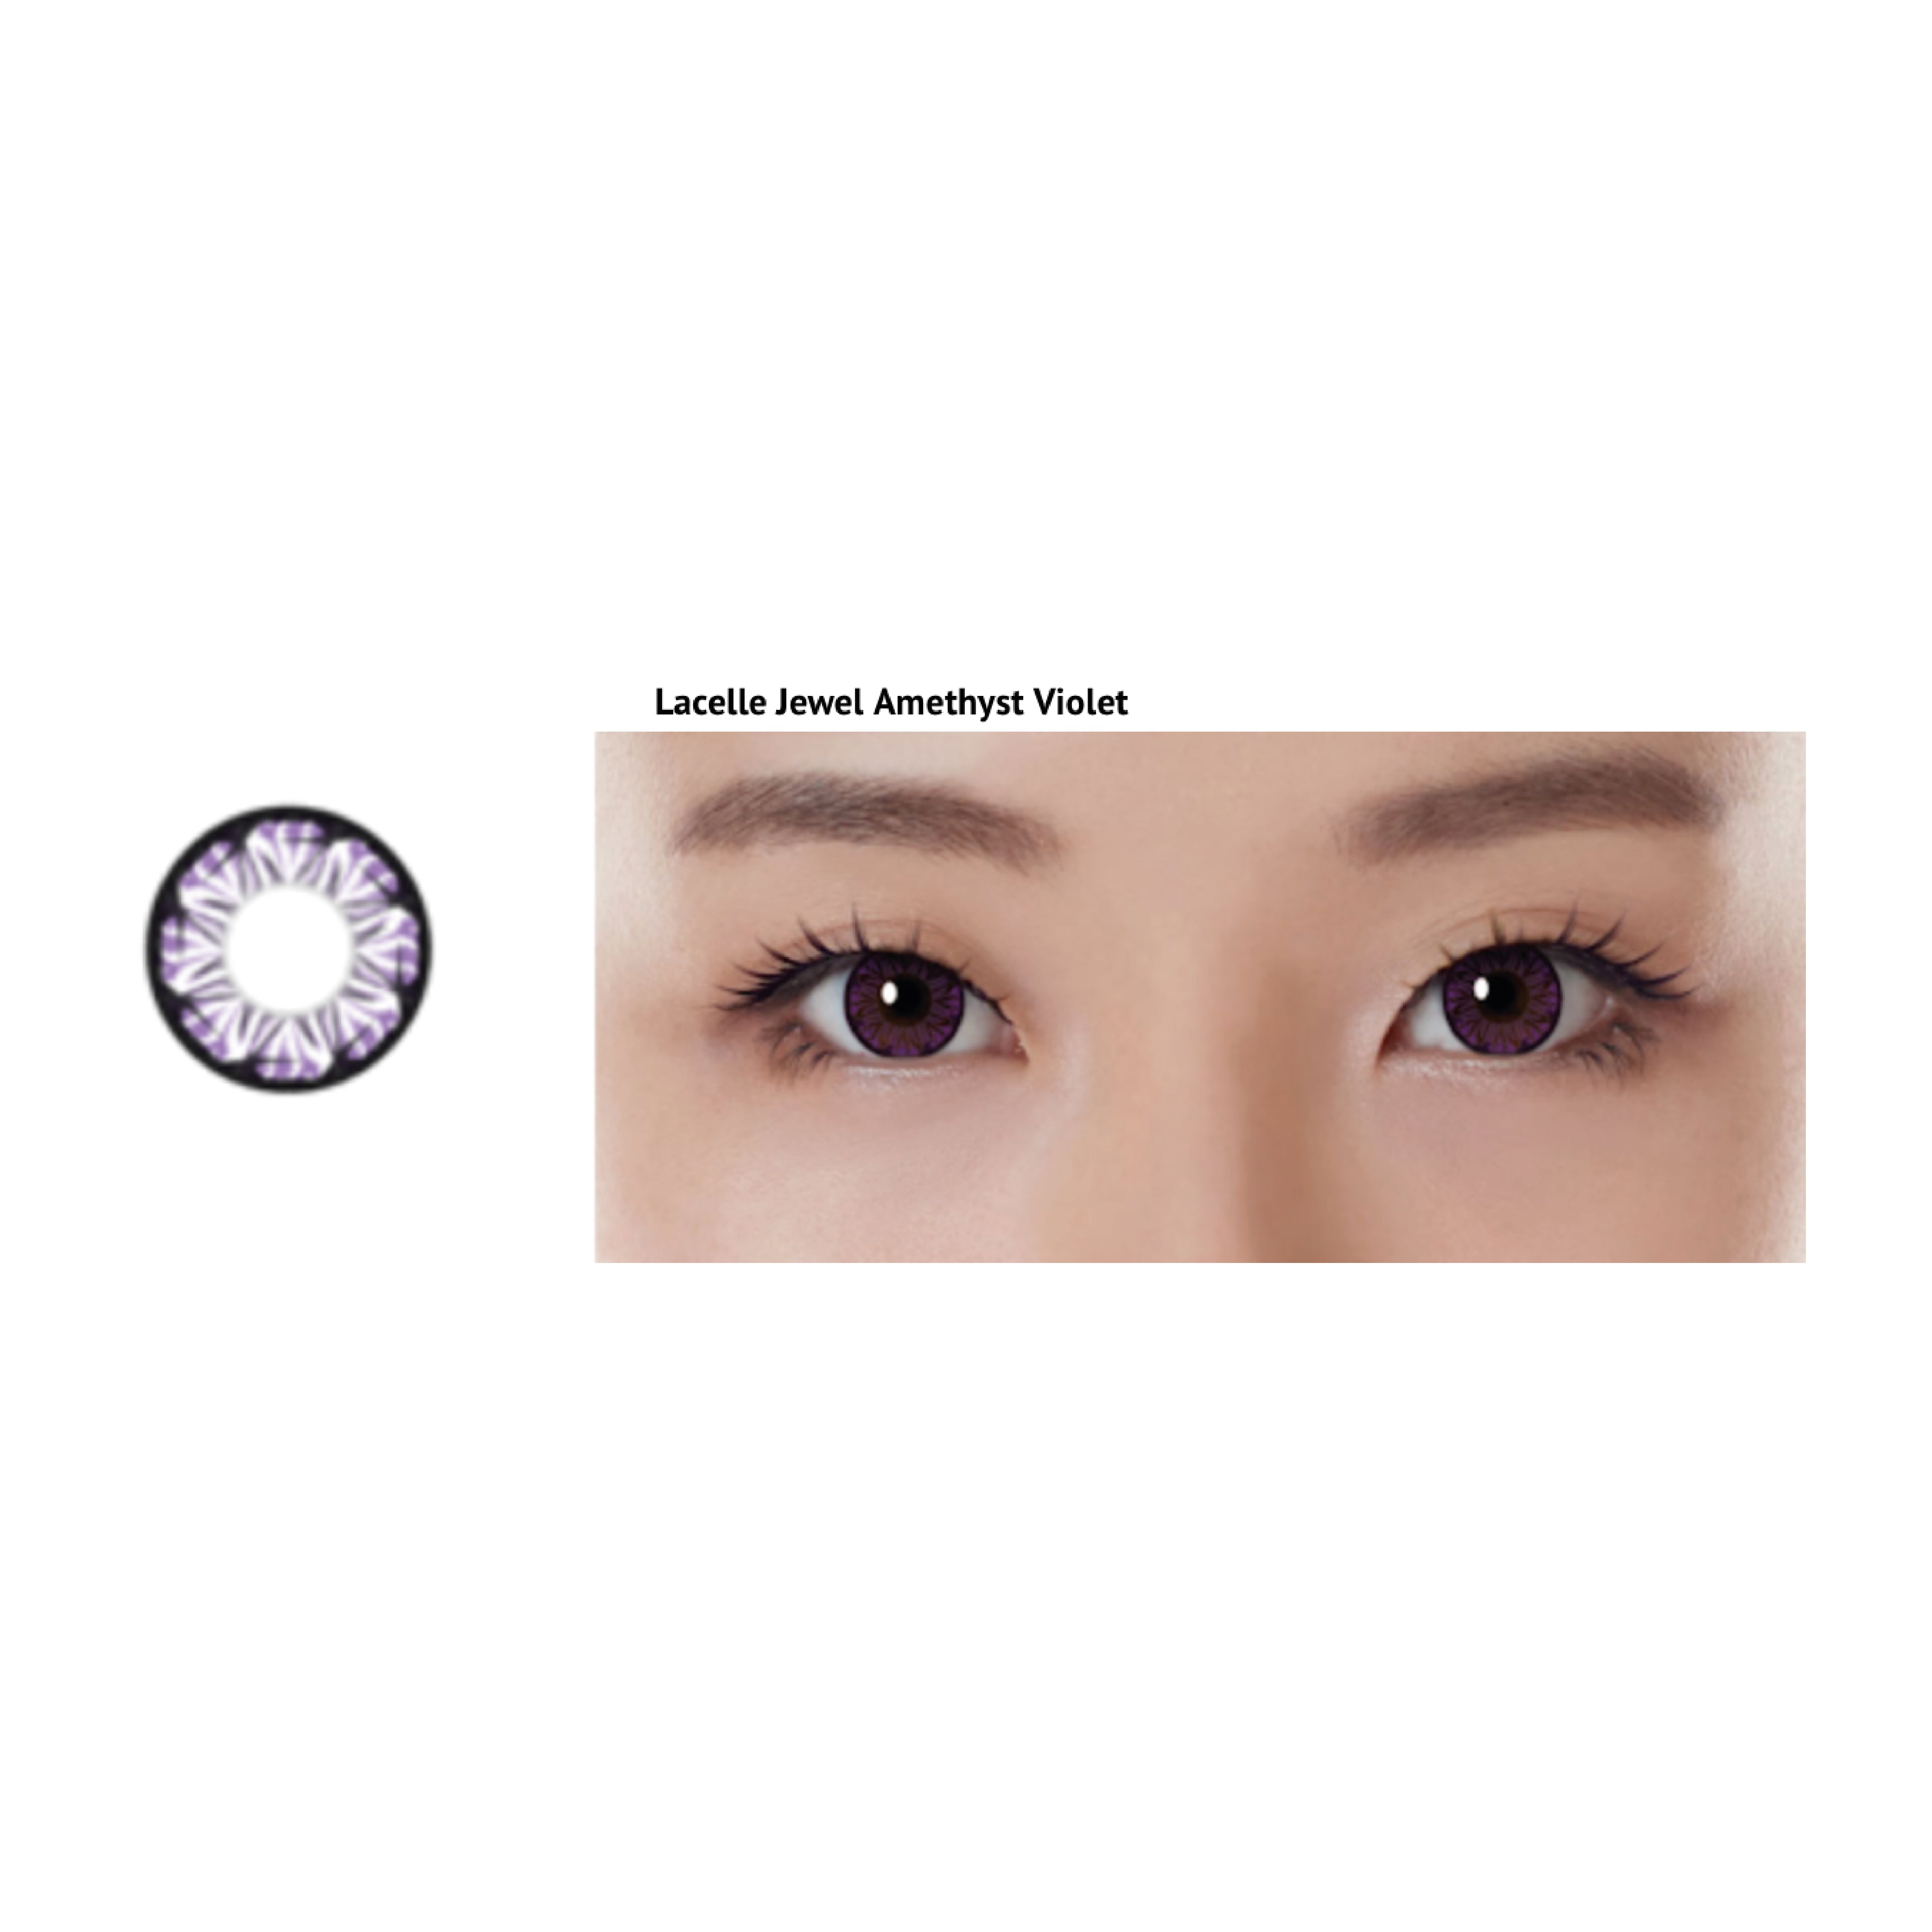 Bausch & Lomb Lacelle Jewel - Amethyst Violet (2 Pack)